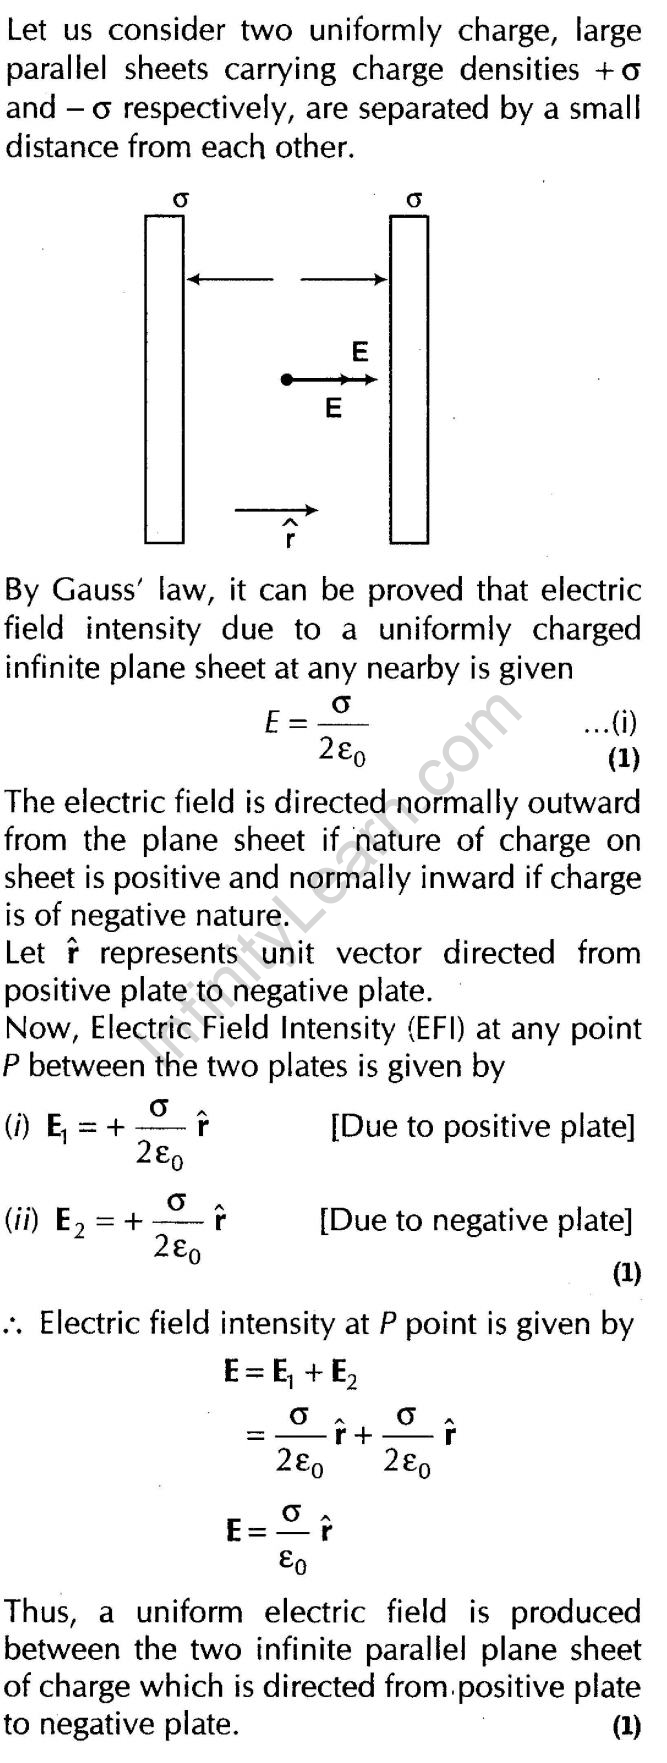 important-questions-for-class-12-physics-cbse-gausss-law-q-29jpg_Page1